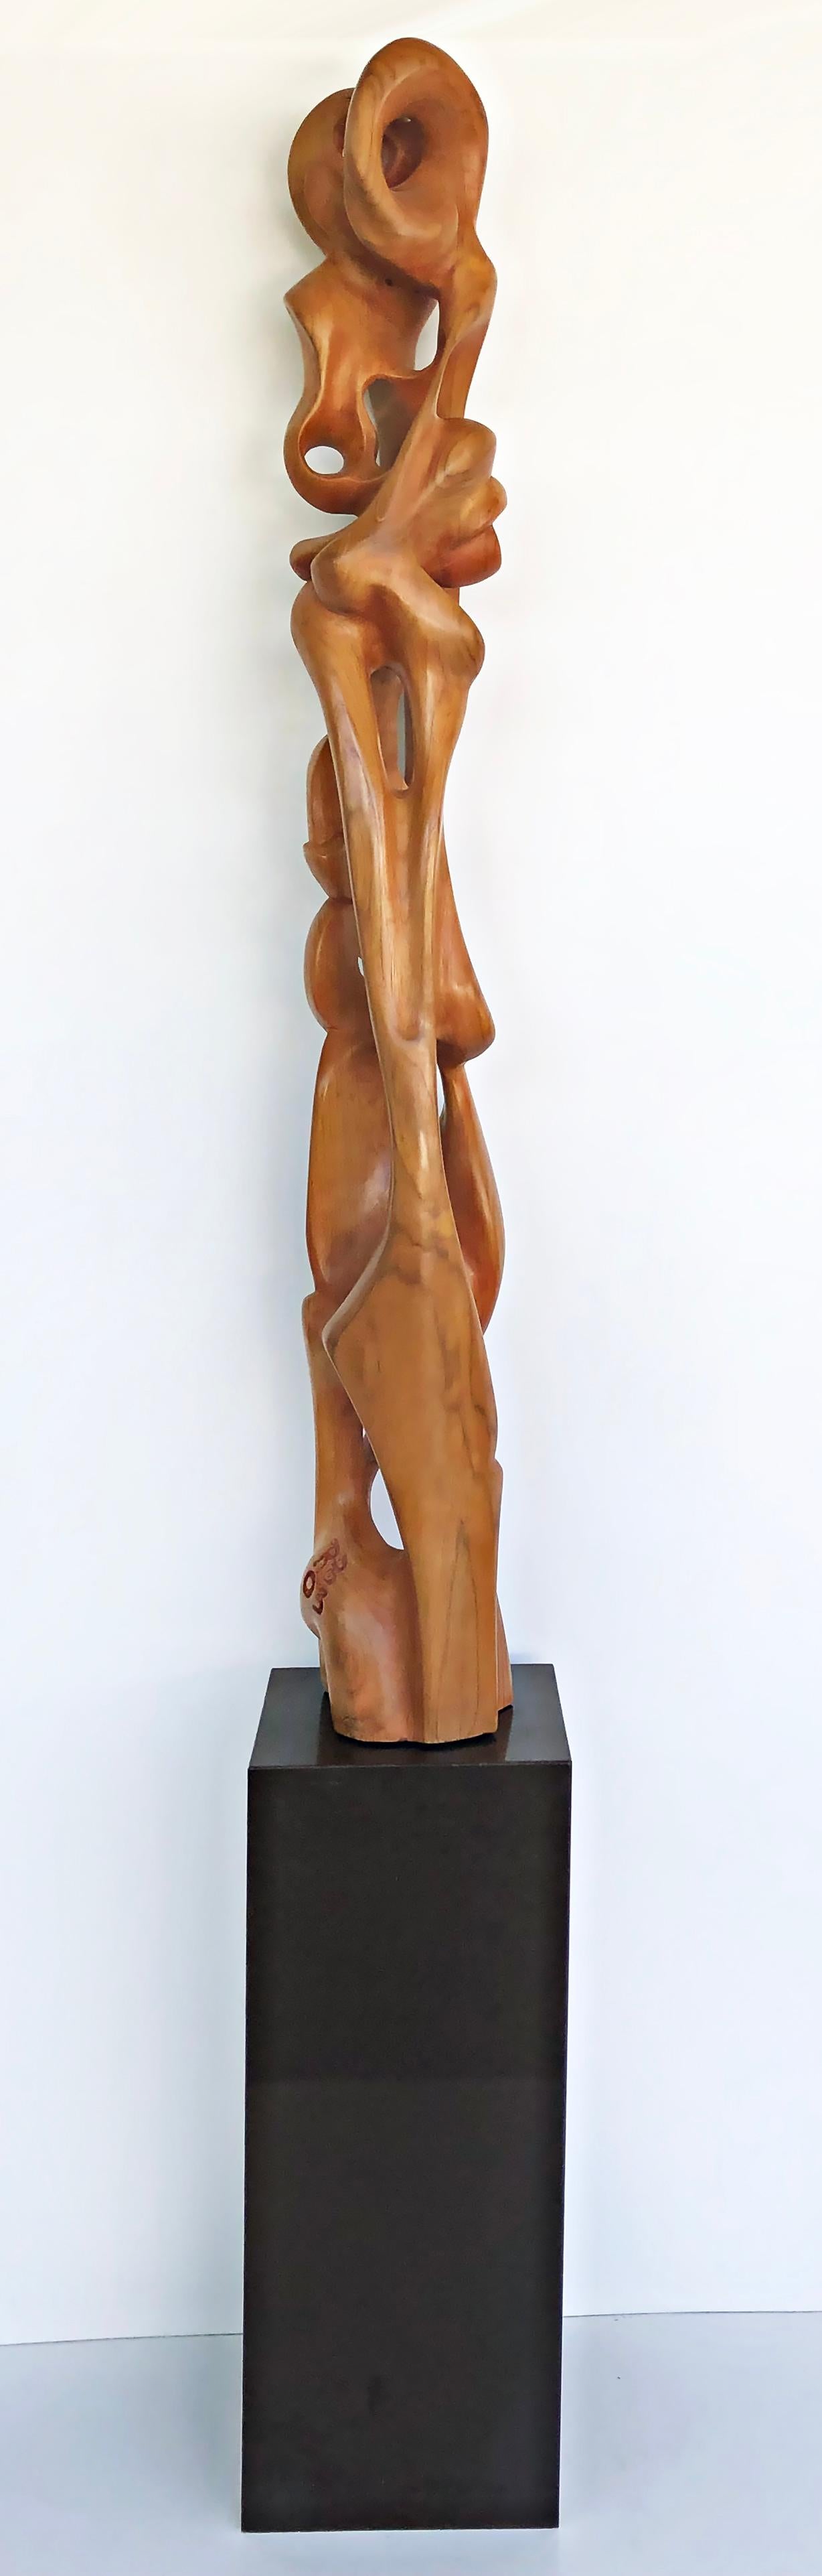 Tall carved teak sculpture by Ramon Barales, Cuban American Artist, 2003.

Offered for sale is monumental solid teak carved figurative sculpture by the Cuban American artist Ramon Barales (b 1974, Cuba). The very tall sculpture is presented upon a